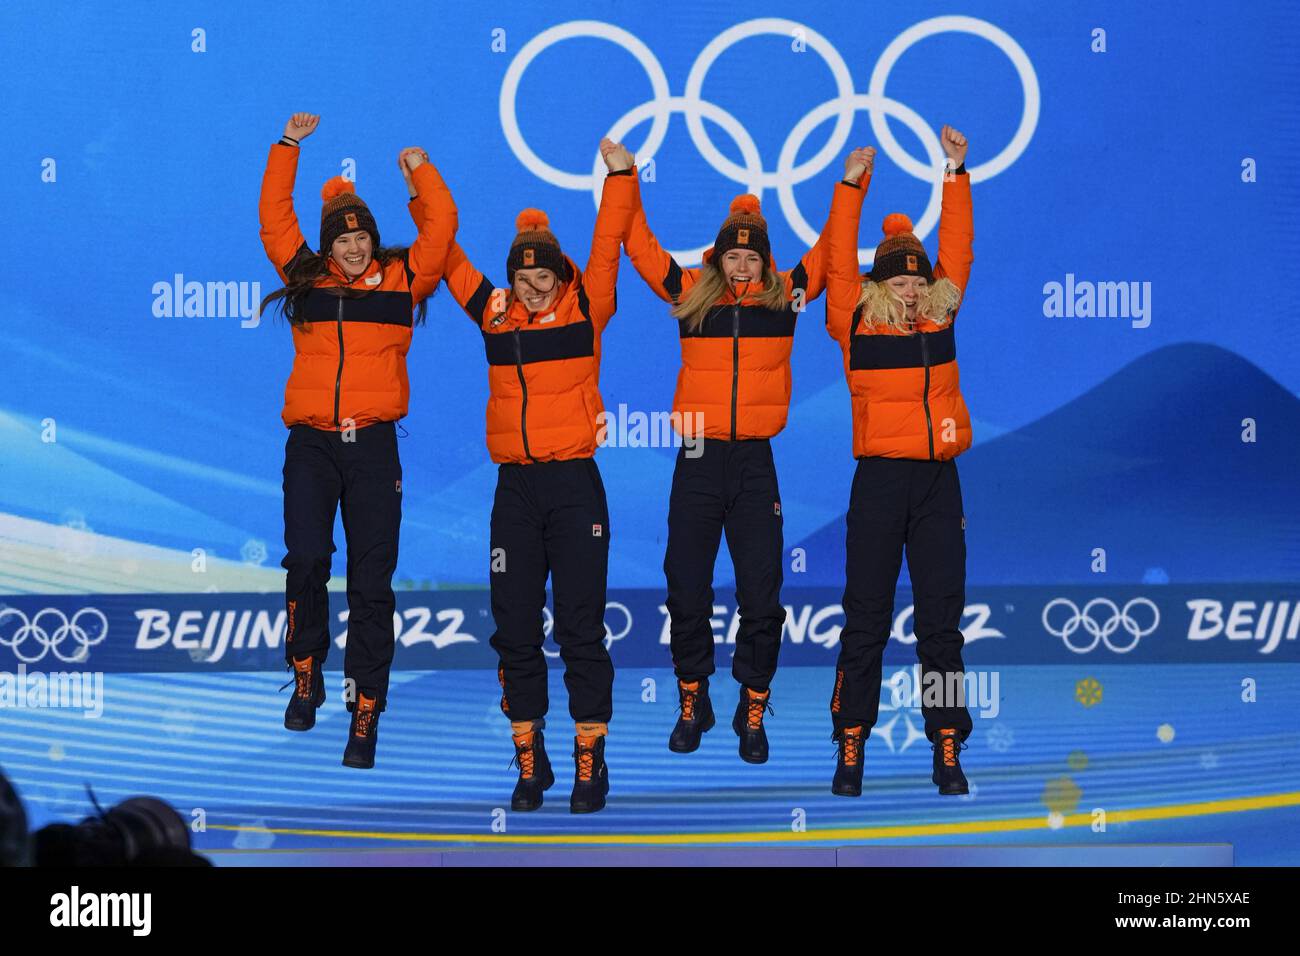 Beijing, China. 14th Feb, 2022. Members of Team Netherlands gold medalists Selma Poutsma, Suzanne Schulting, Yara van Kerkhof, and Xandra Velzeboer leap onto the podium during the medals ceremony for the Women's Short Track 3000m Relay at the Beijing 2022 Winter Olympics on Monday, February 14, 2022. Photo by Paul Hanna/UPI Credit: UPI/Alamy Live News Stock Photo